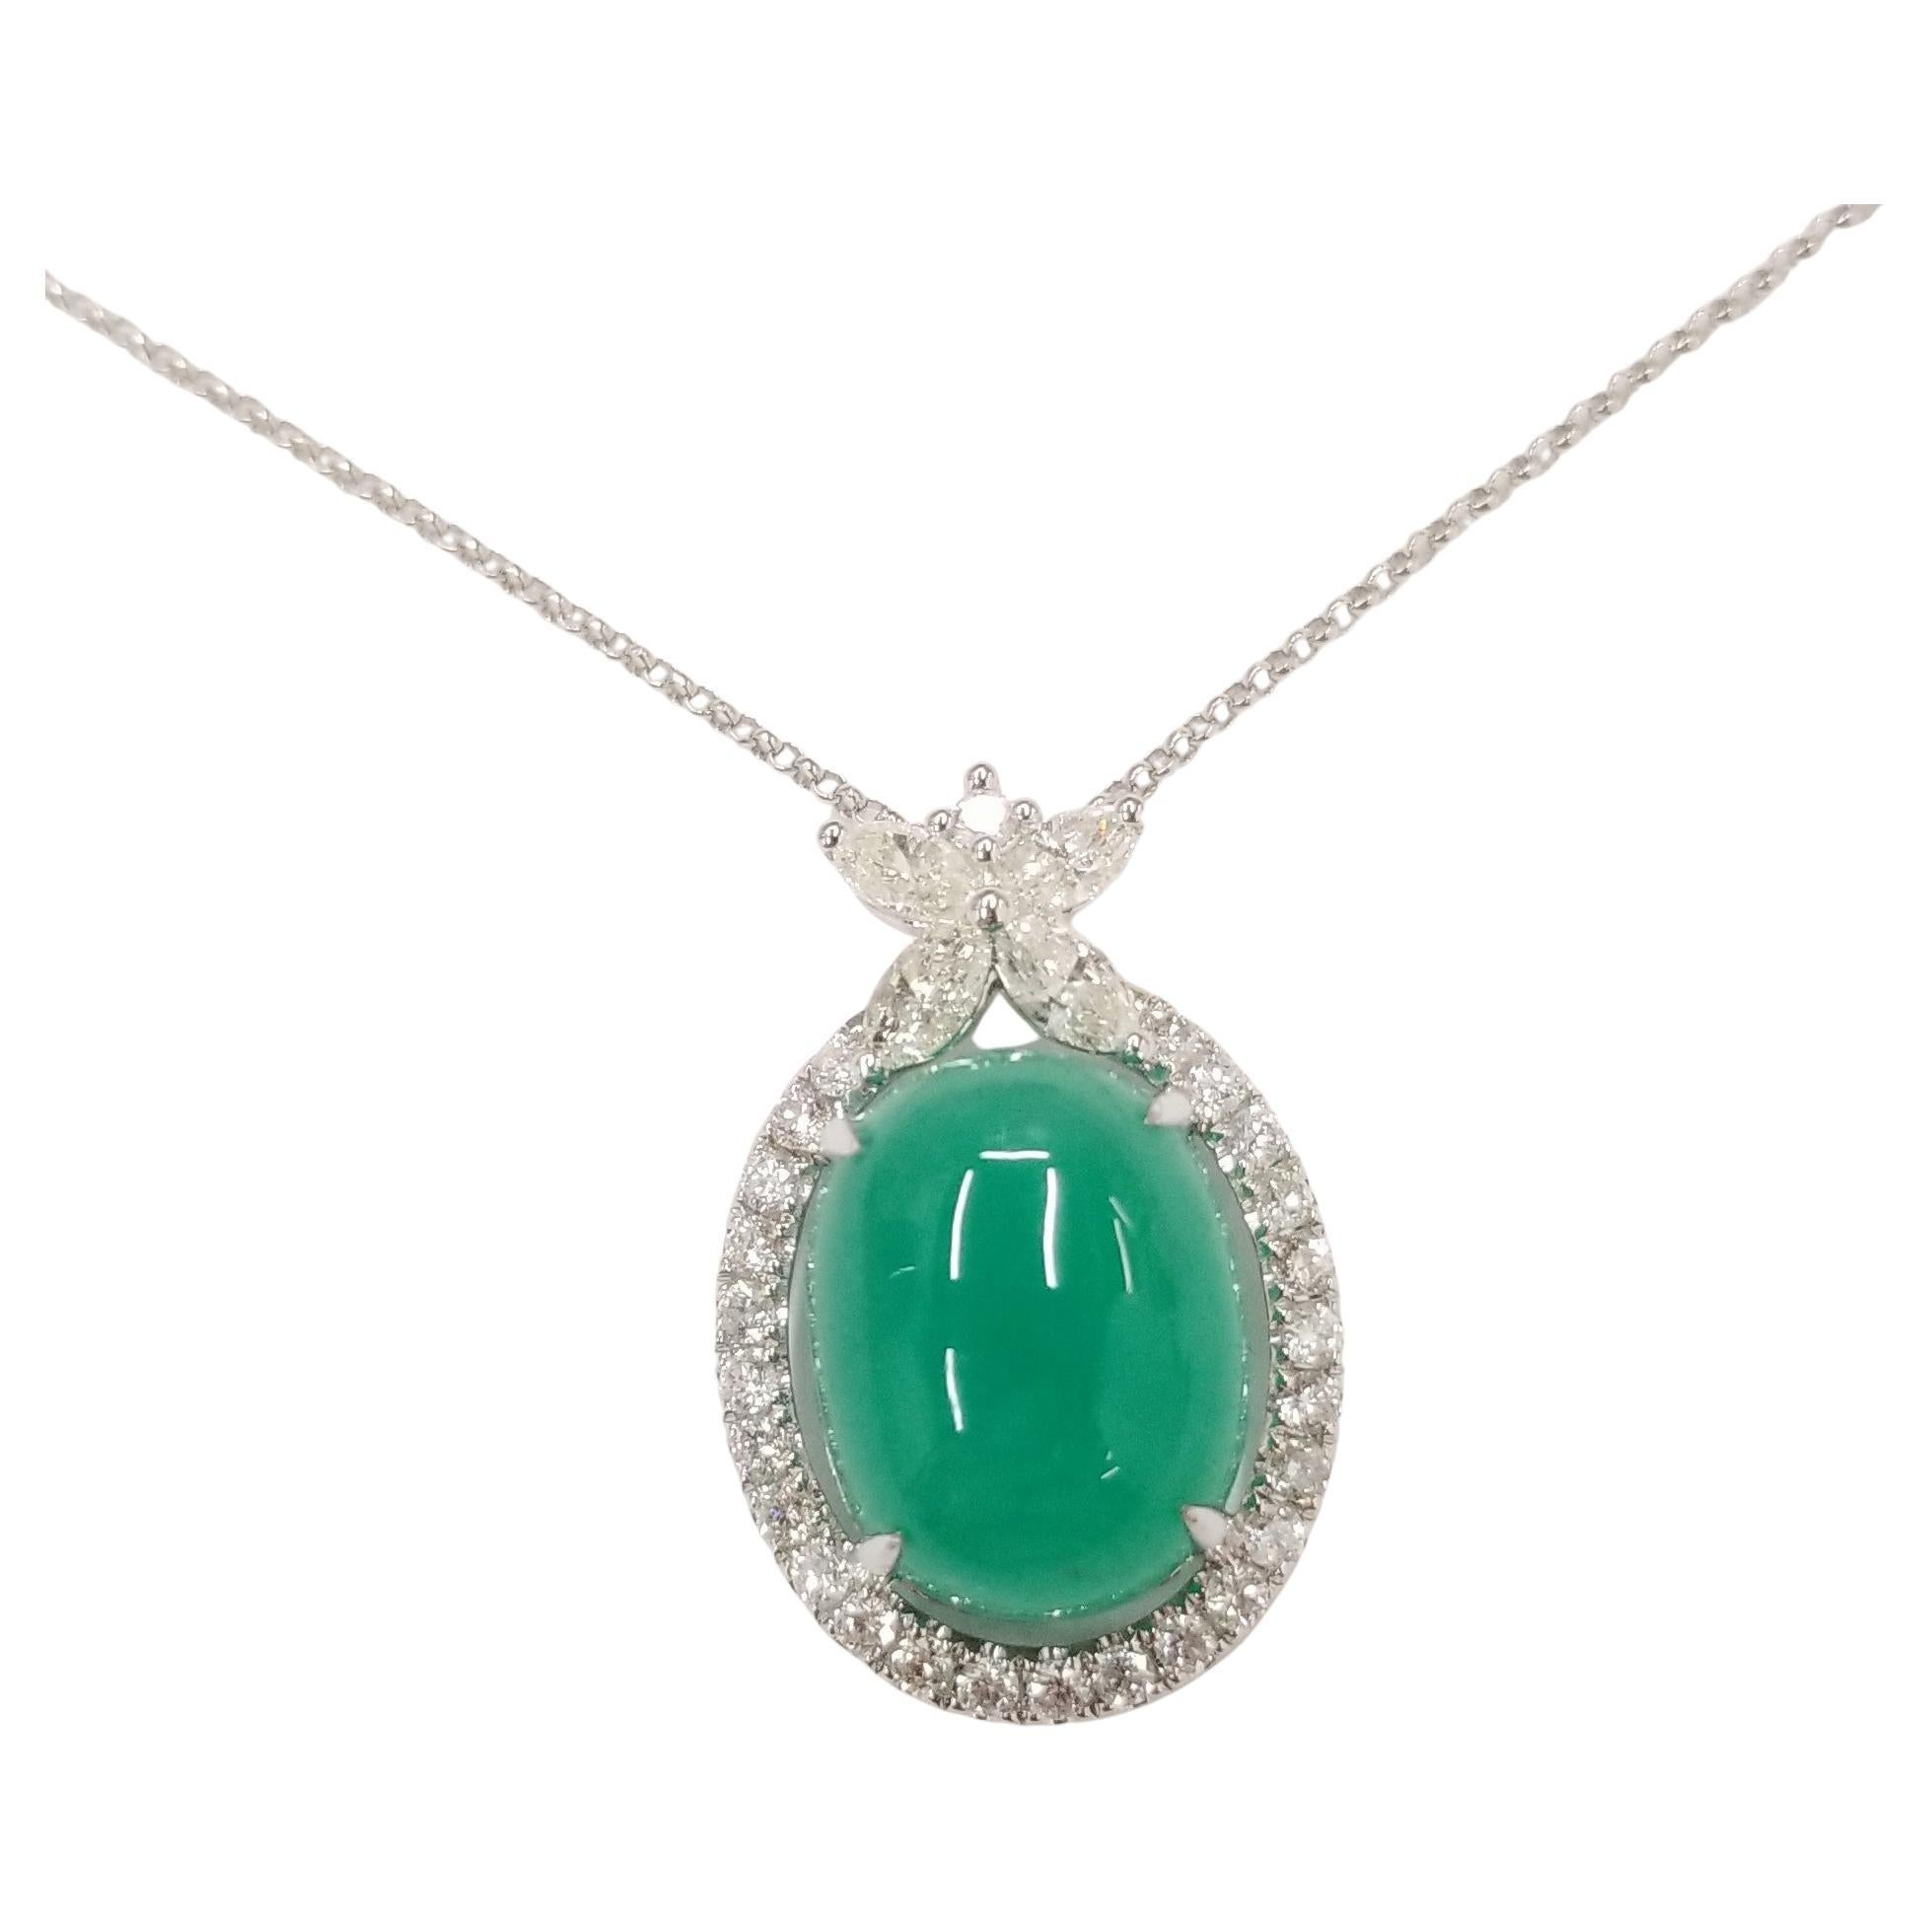 Stunning emerald pendant of superb color, with bezel set diamond halo and decorative marquise diamond holder design. 
A single 12.09 carat oval cabochon emerald, and 1.20 carats of natural diamonds make up to a 13.29 carats total gemstone